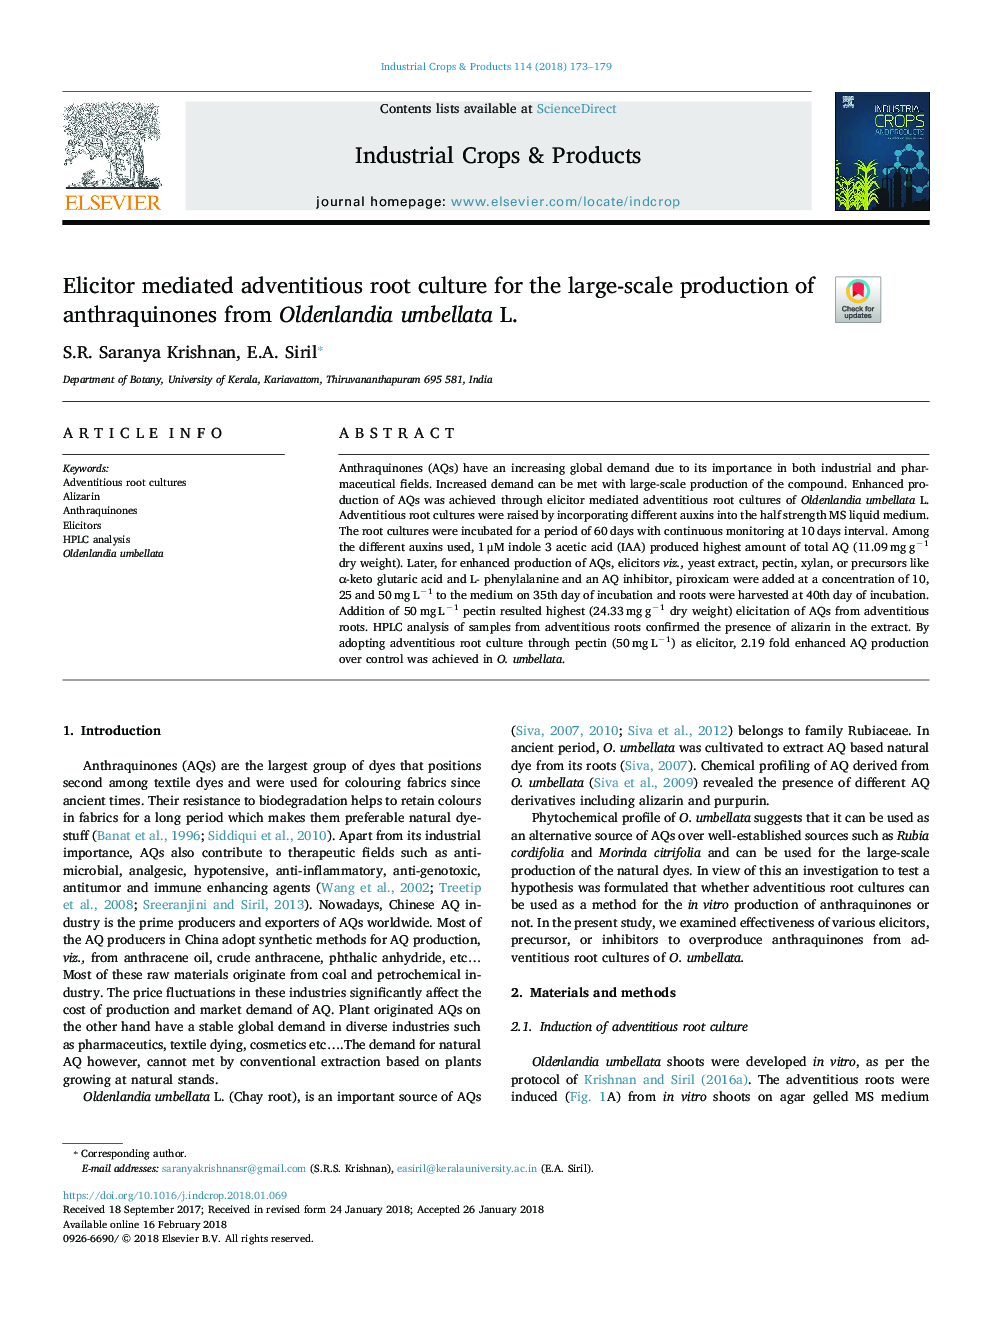 Elicitor mediated adventitious root culture for the large-scale production of anthraquinones from Oldenlandia umbellata L.